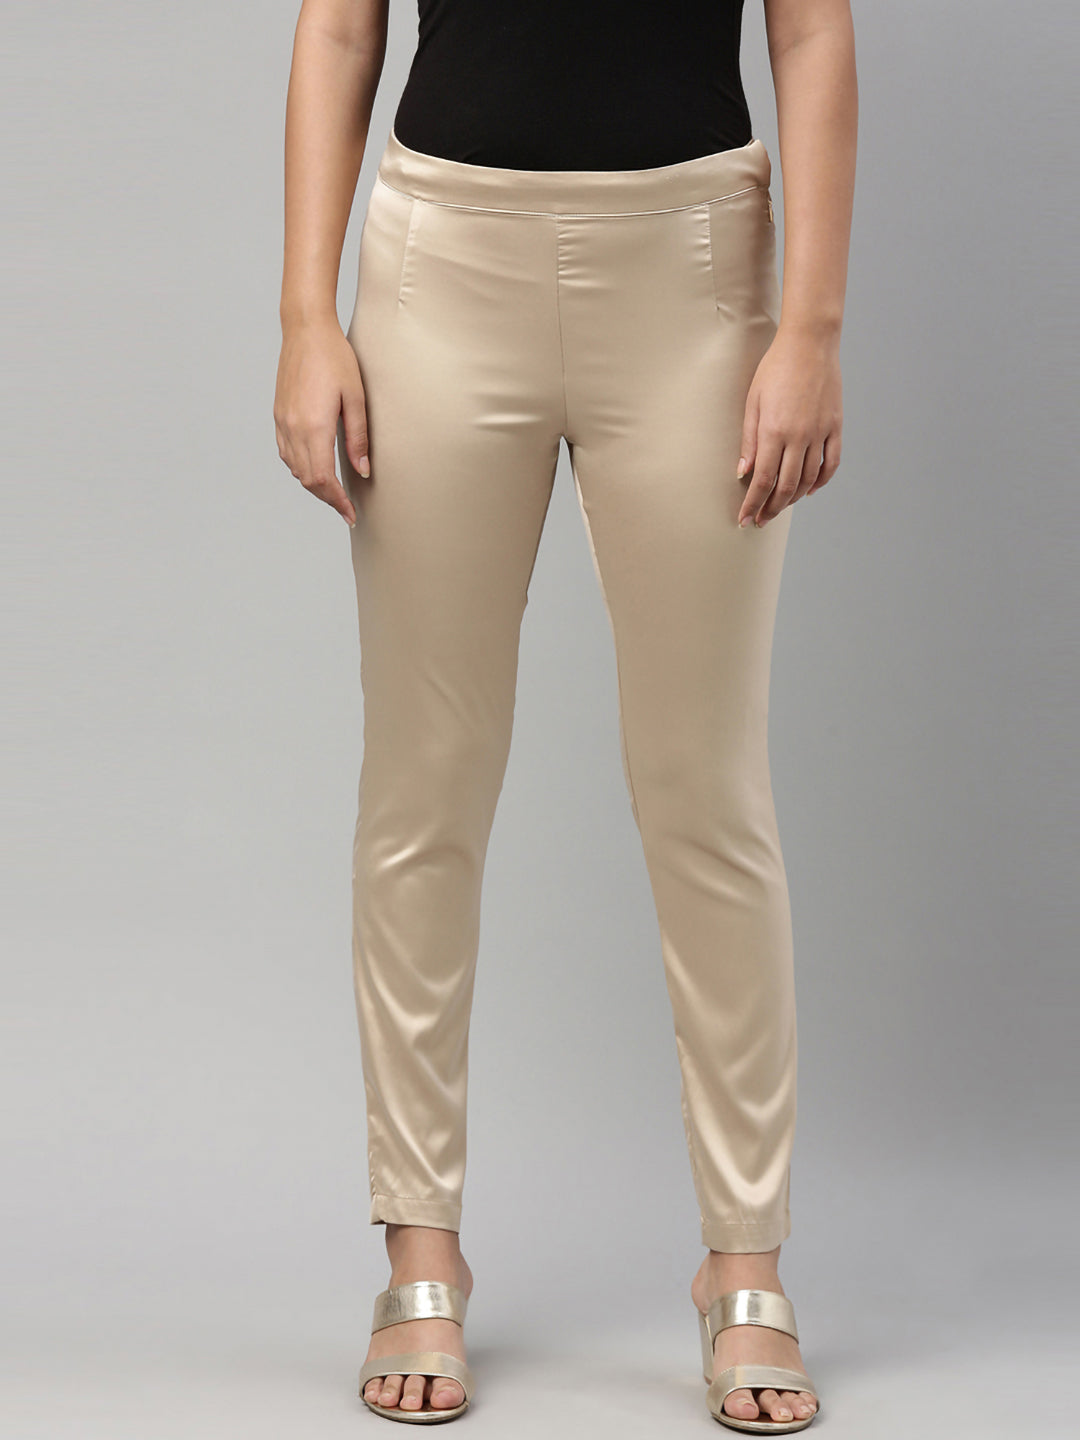 Buy Golden Regular Fit Cotton Pencil Elastic Waist Pant Online | Casual and  Formal Trousers for Women | CyberMart India